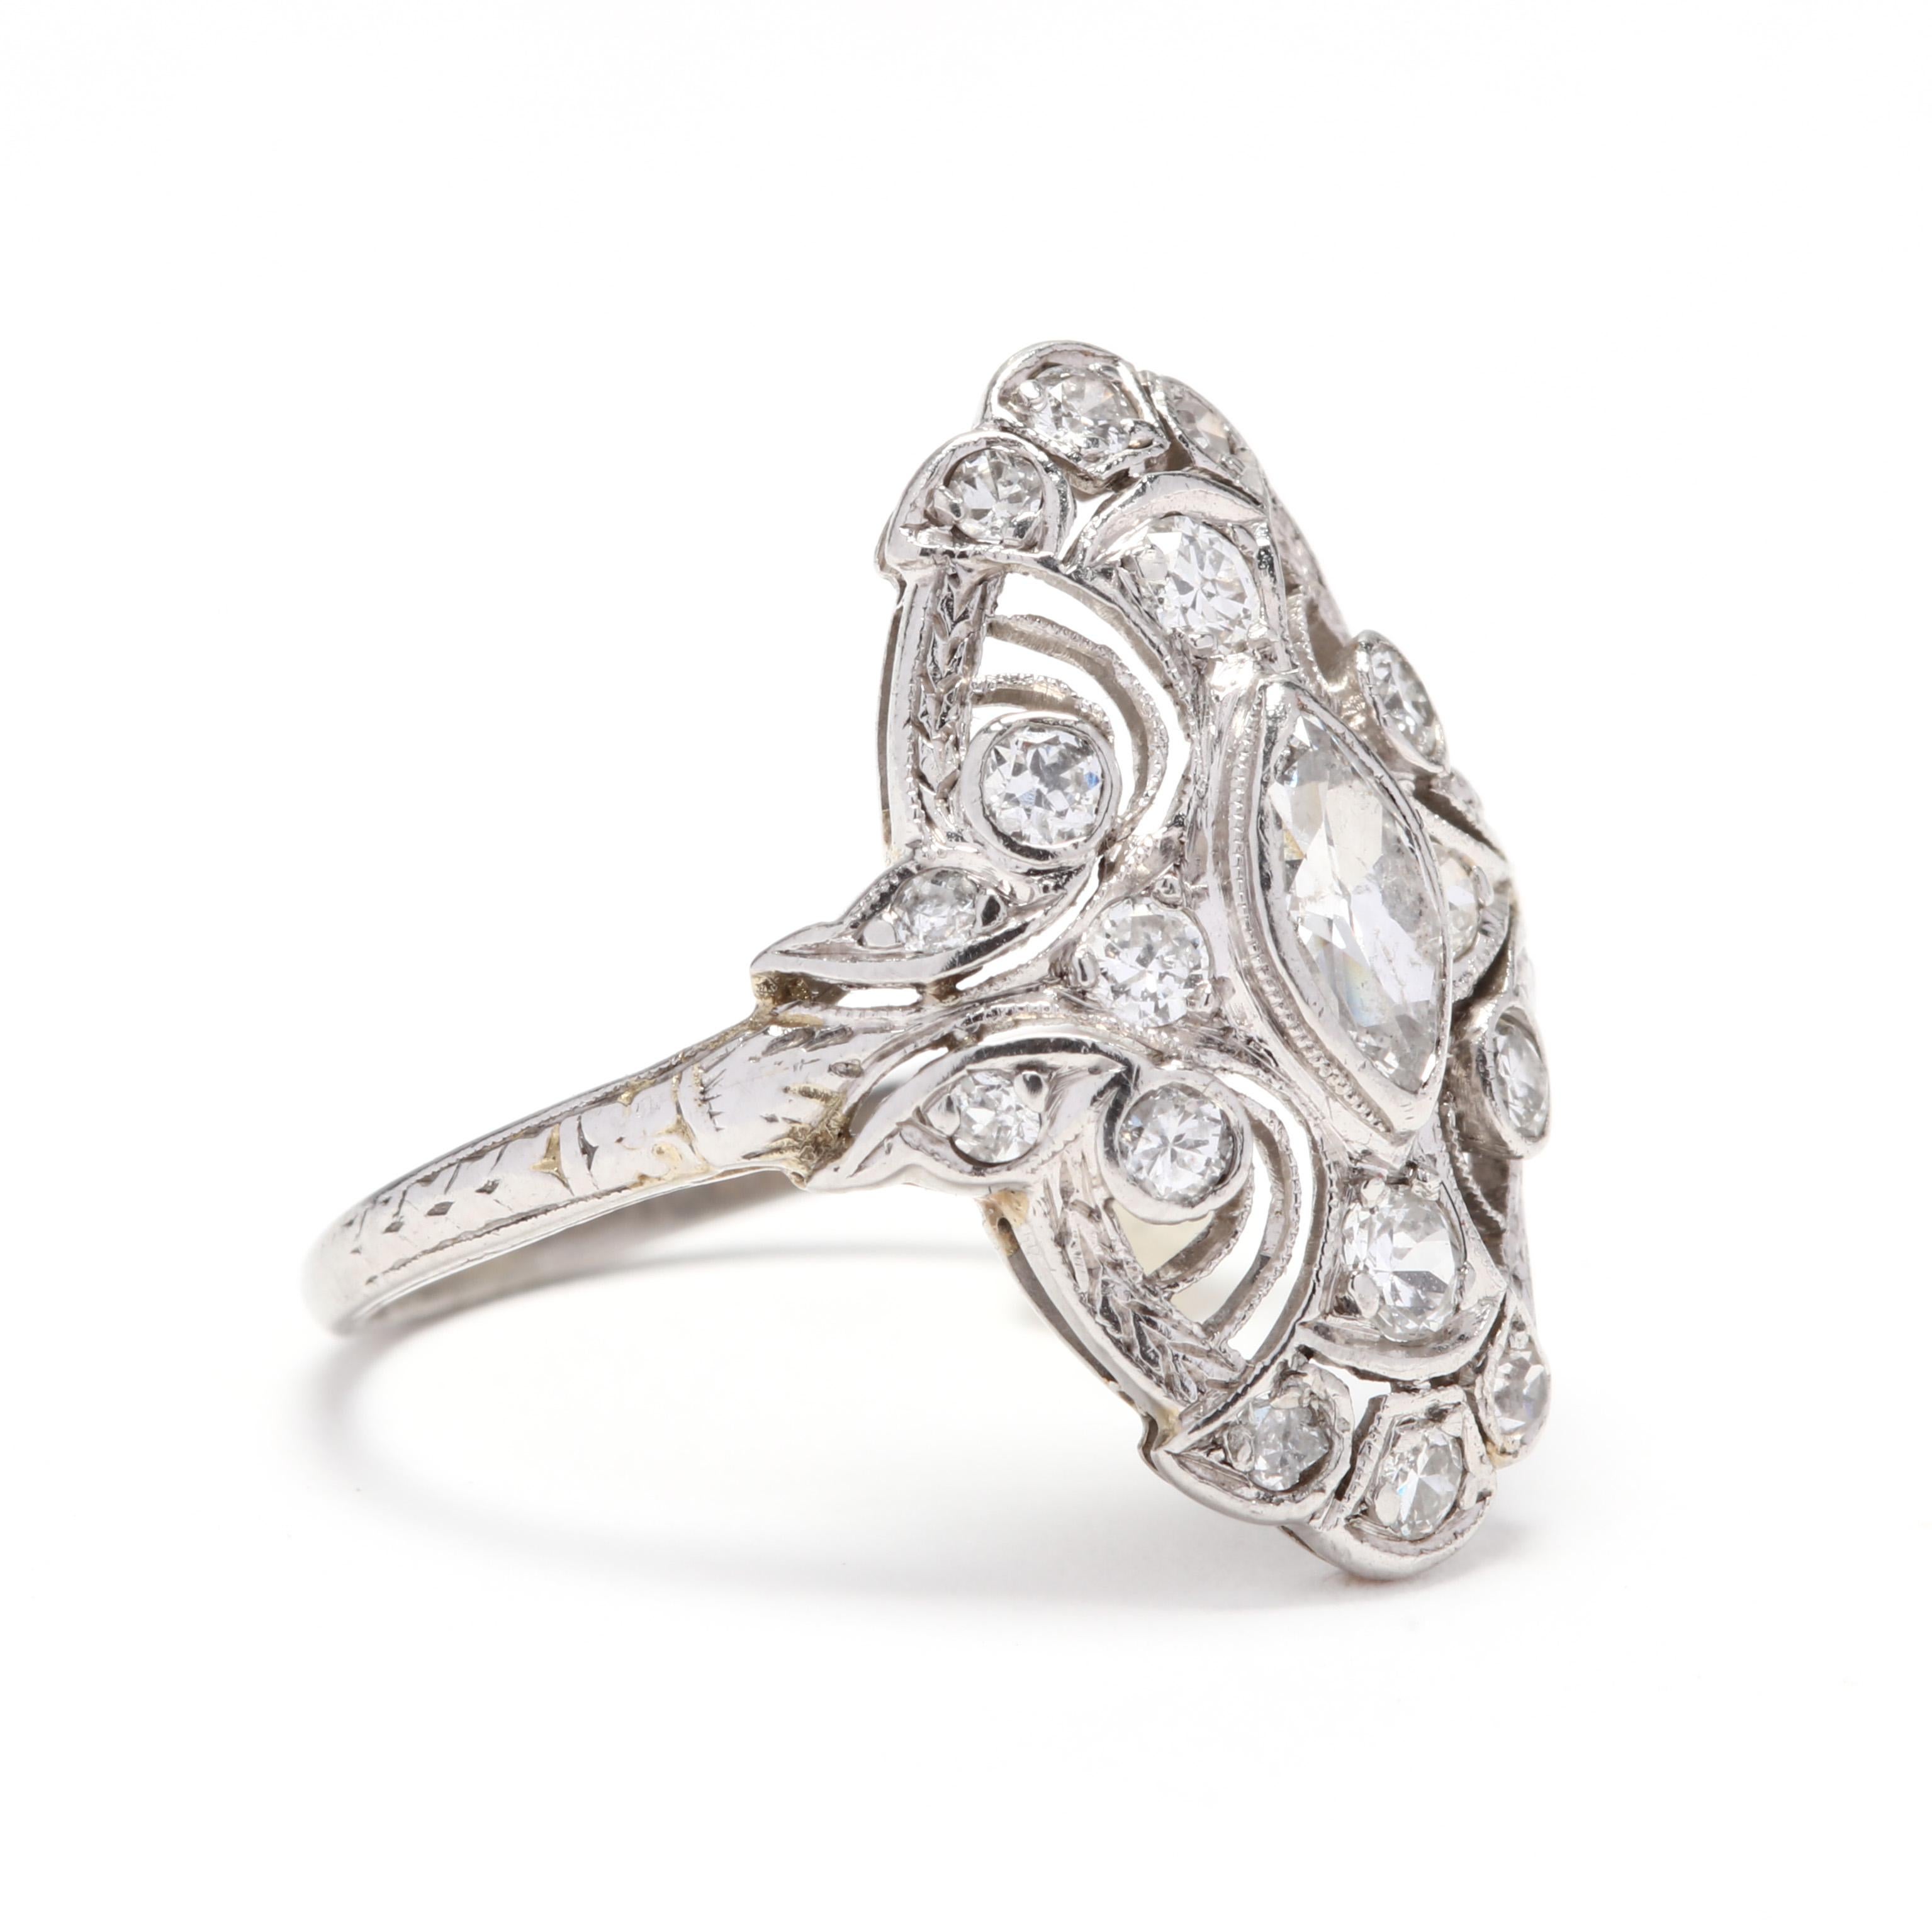 Art Deco 18 karat white gold diamond navette ring. This ring features a marquise center stone with single cut diamond detailing. It is finished with filigree and engraving detail.

Diamonds: approximately .75ctw

2.62 dwts

Size 6.75

* Please note